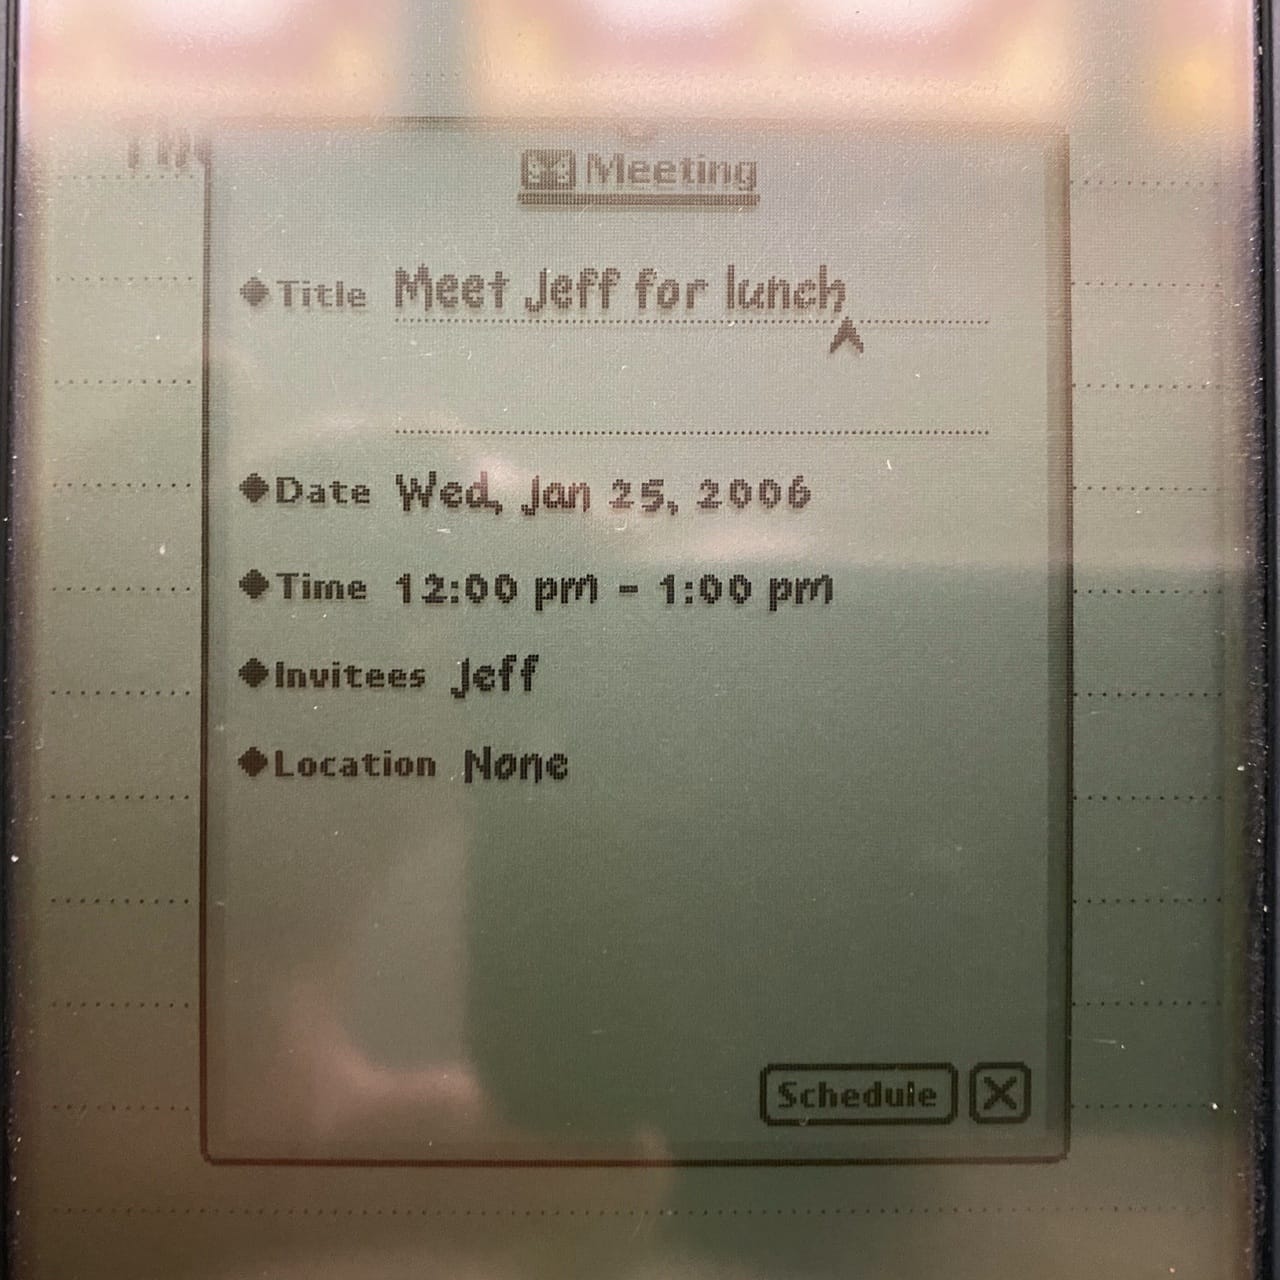 ...becomes a meeting in the Newton Calendar app. A foretaste of Siri from 1997. Note that this Newton still retained this meeting request from 2006 in 2020!